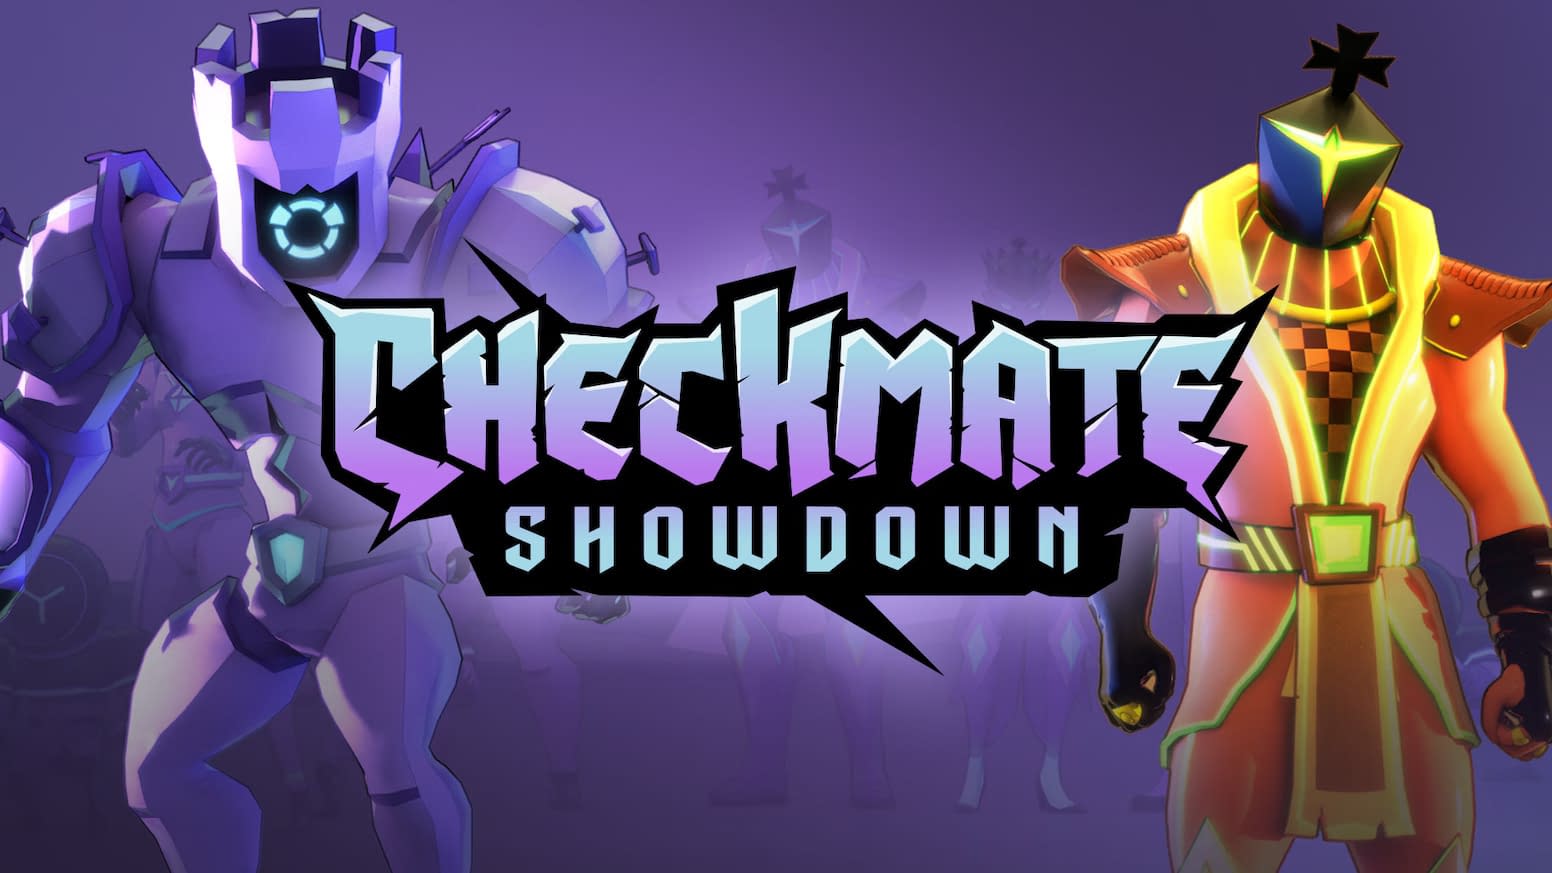 CheckMate Official (@checkmate.yt) • Instagram photos and videos